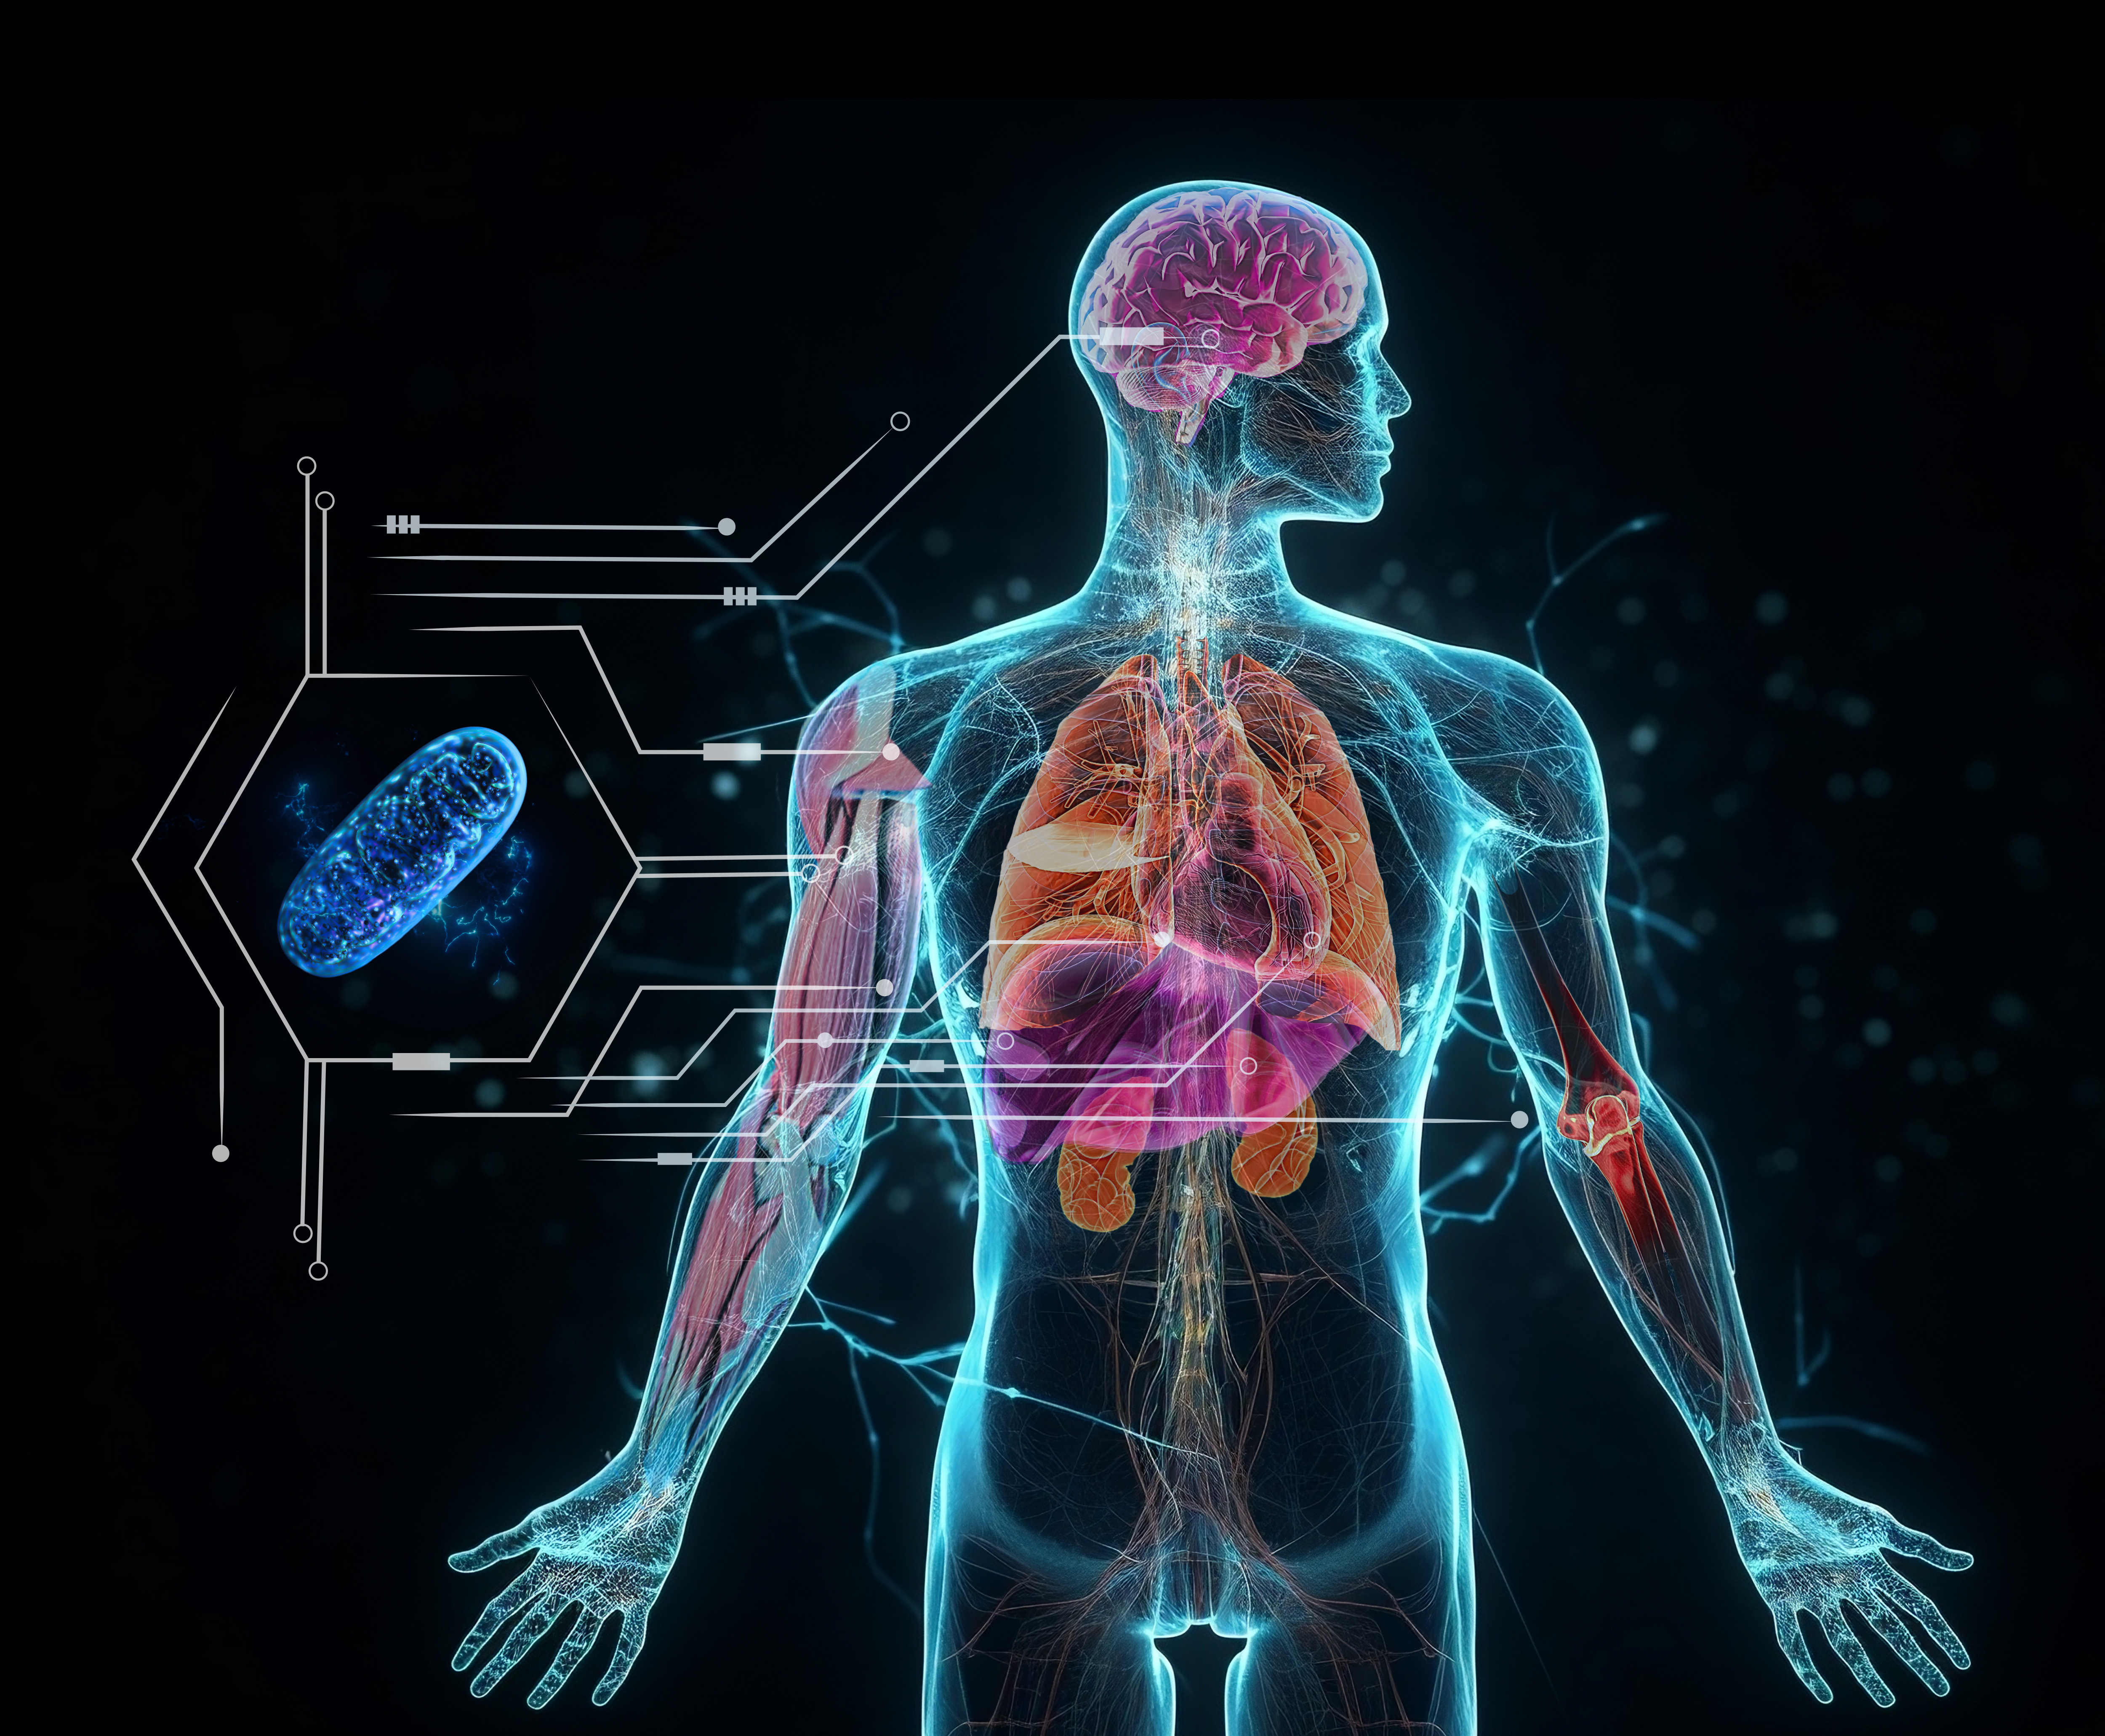 Image of futuristic human with highlighted organs: muscle, joint, brain, lungs, heart, liver, and kidneys. Mitchondria indicated to be transplanted to these organs